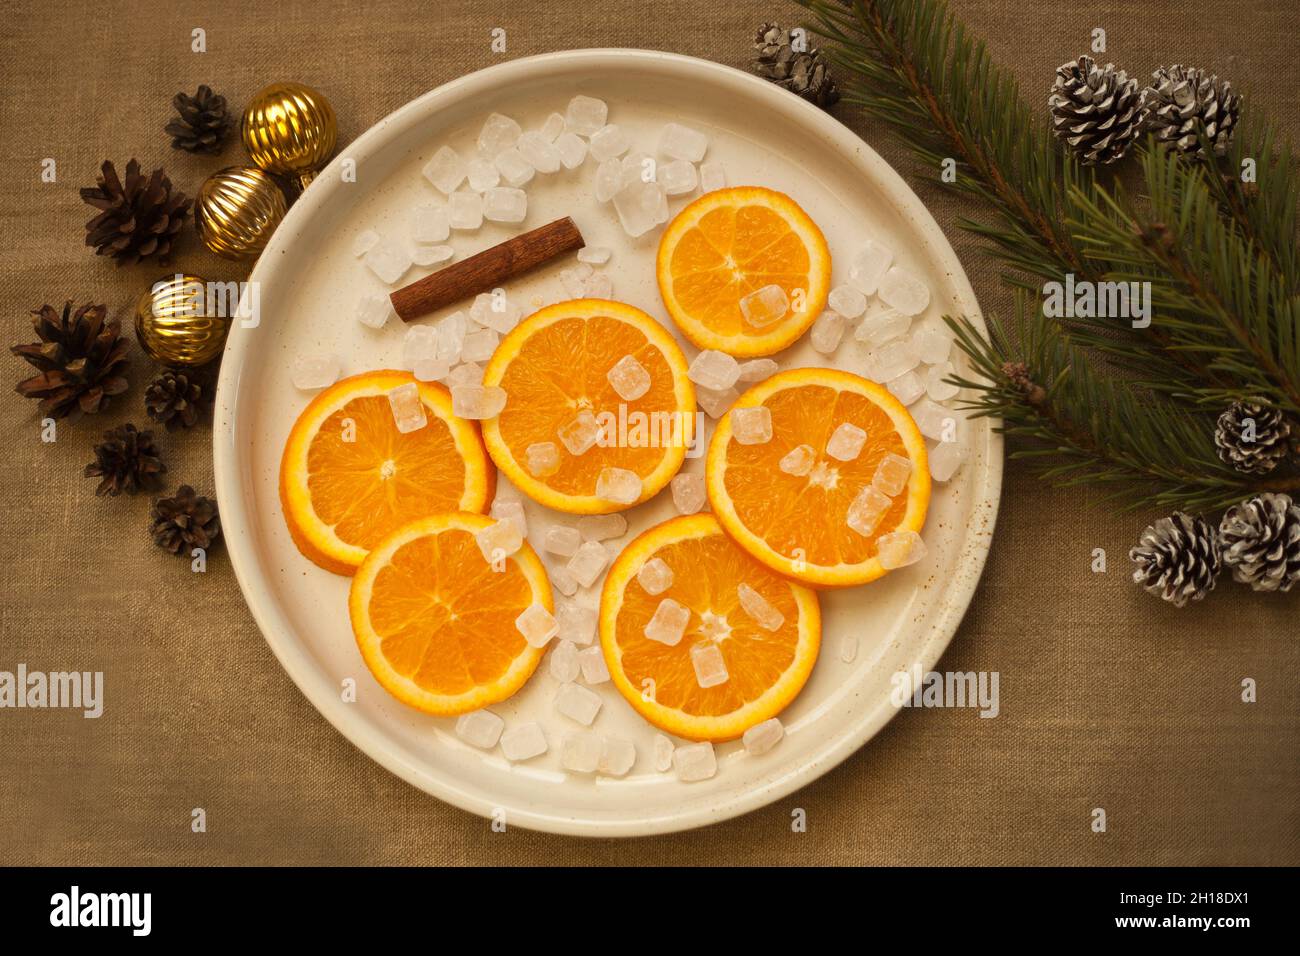 oranges at the plate near christmas tree branch, golden balls and pine cones. Tangerine decorations Stock Photo